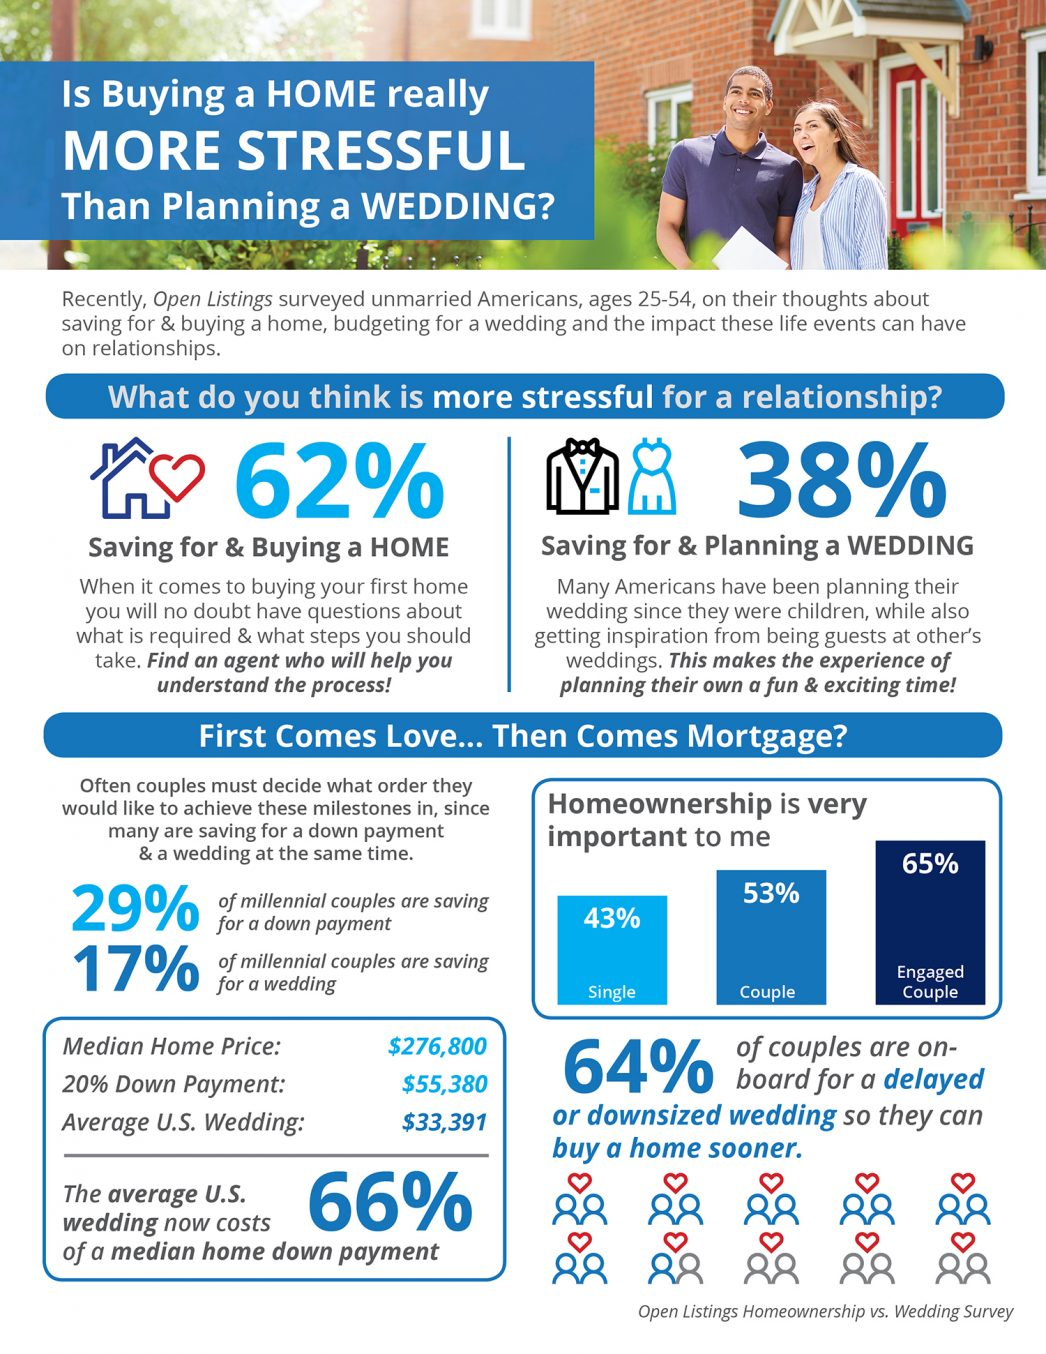 Is Buying a Home Really More Stressful Than Planning a Wedding? [INFOGRAPHIC] | MyKCM